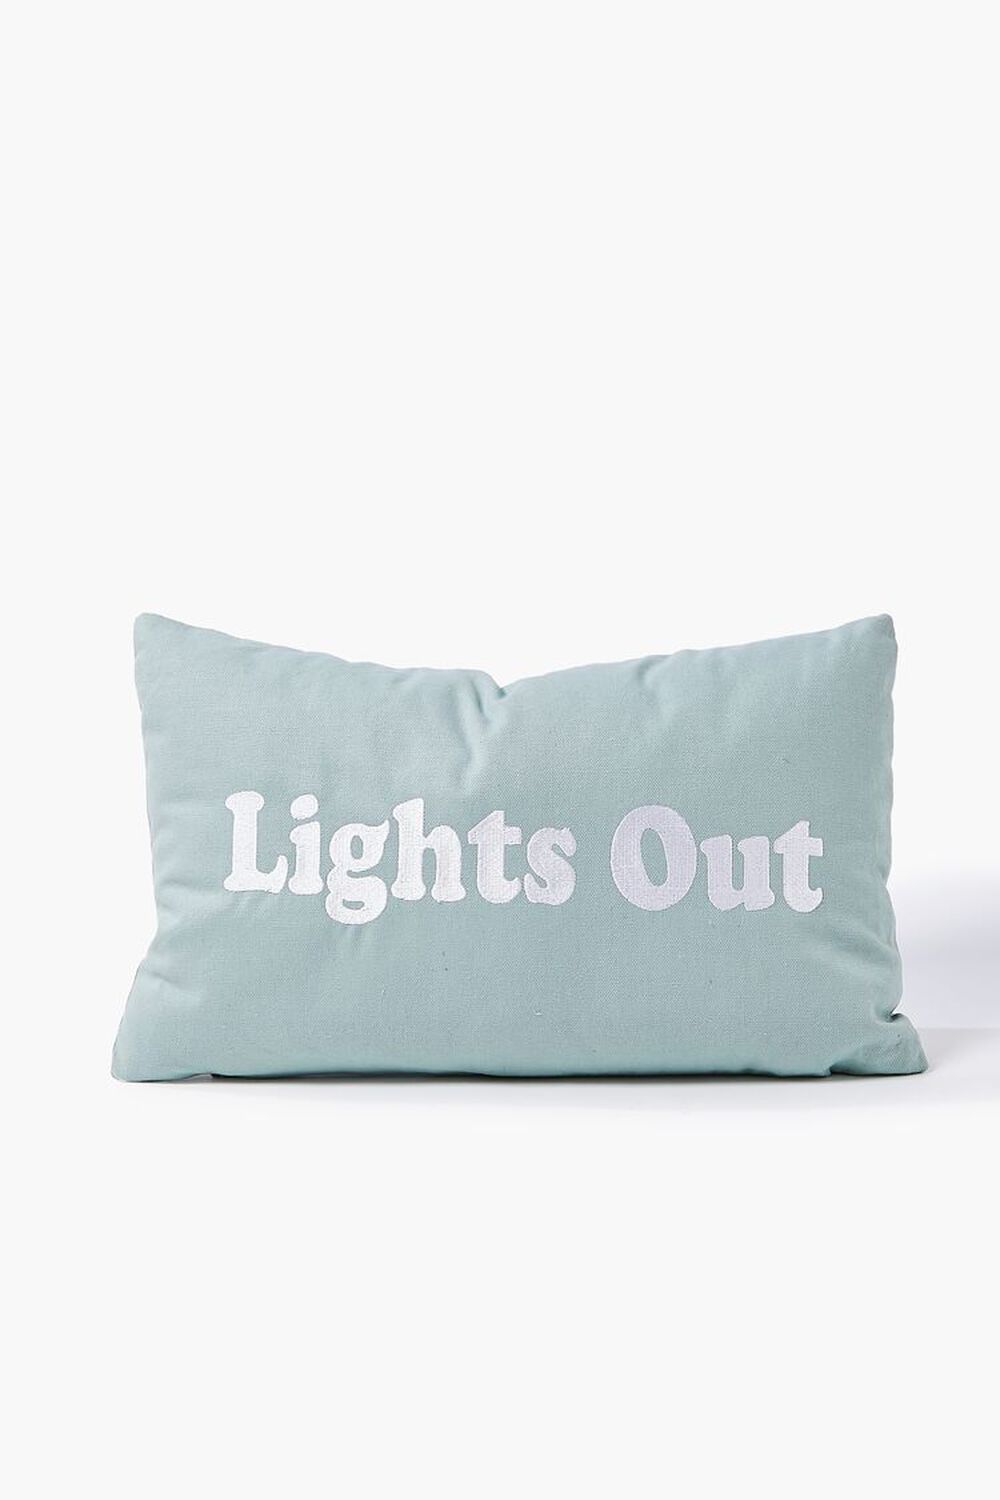 LIGHT BLUE/WHITE Embroidered Lights Out Graphic Pillow, image 1